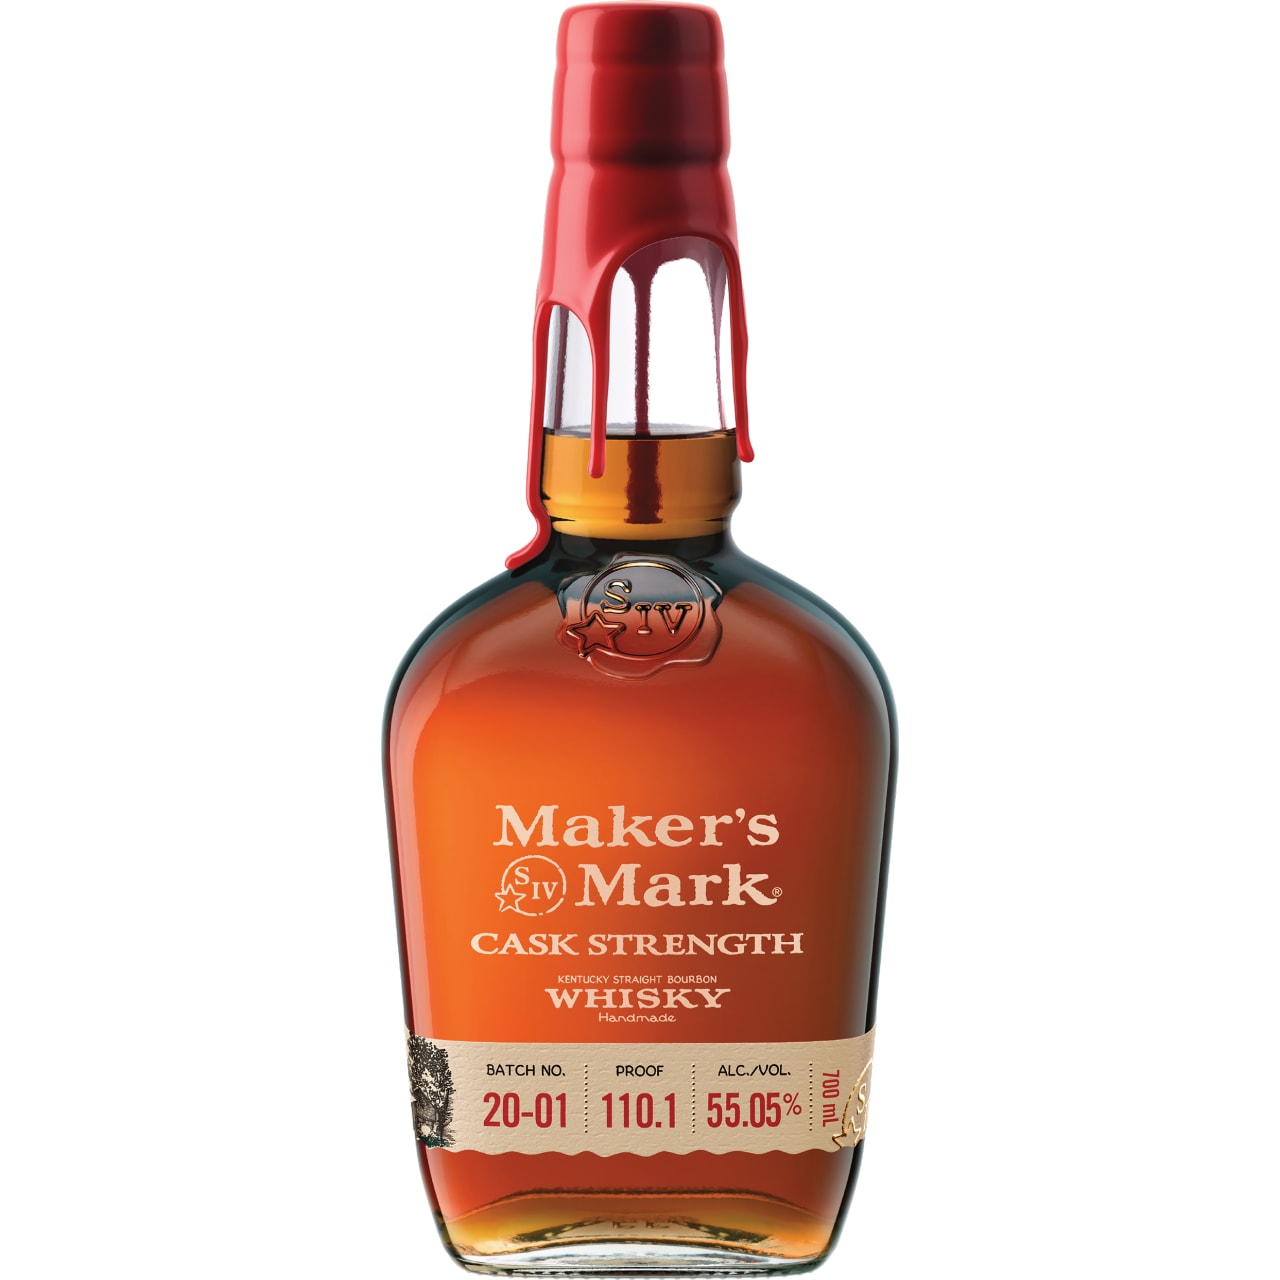 The iconic Maker's Mark bottled at cask strength! This higher proof variant takes the classic flavour profile and dials it up a notch or two…